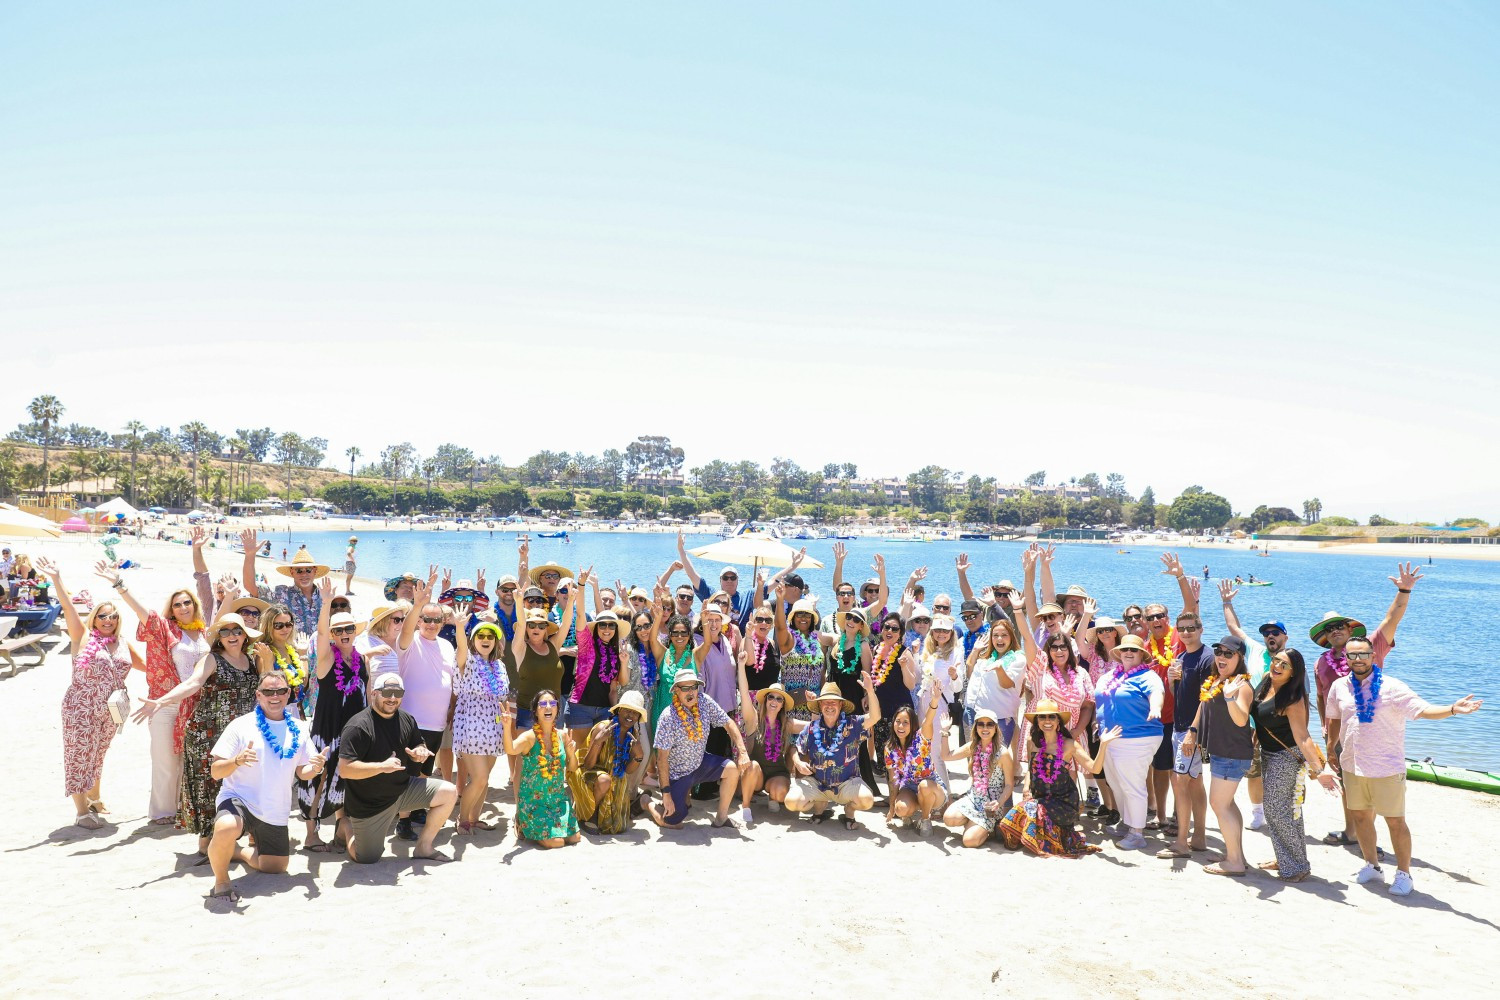 Team members from our SoCal division basked in the sun celebrating their hard work with a joyous family day at the beach